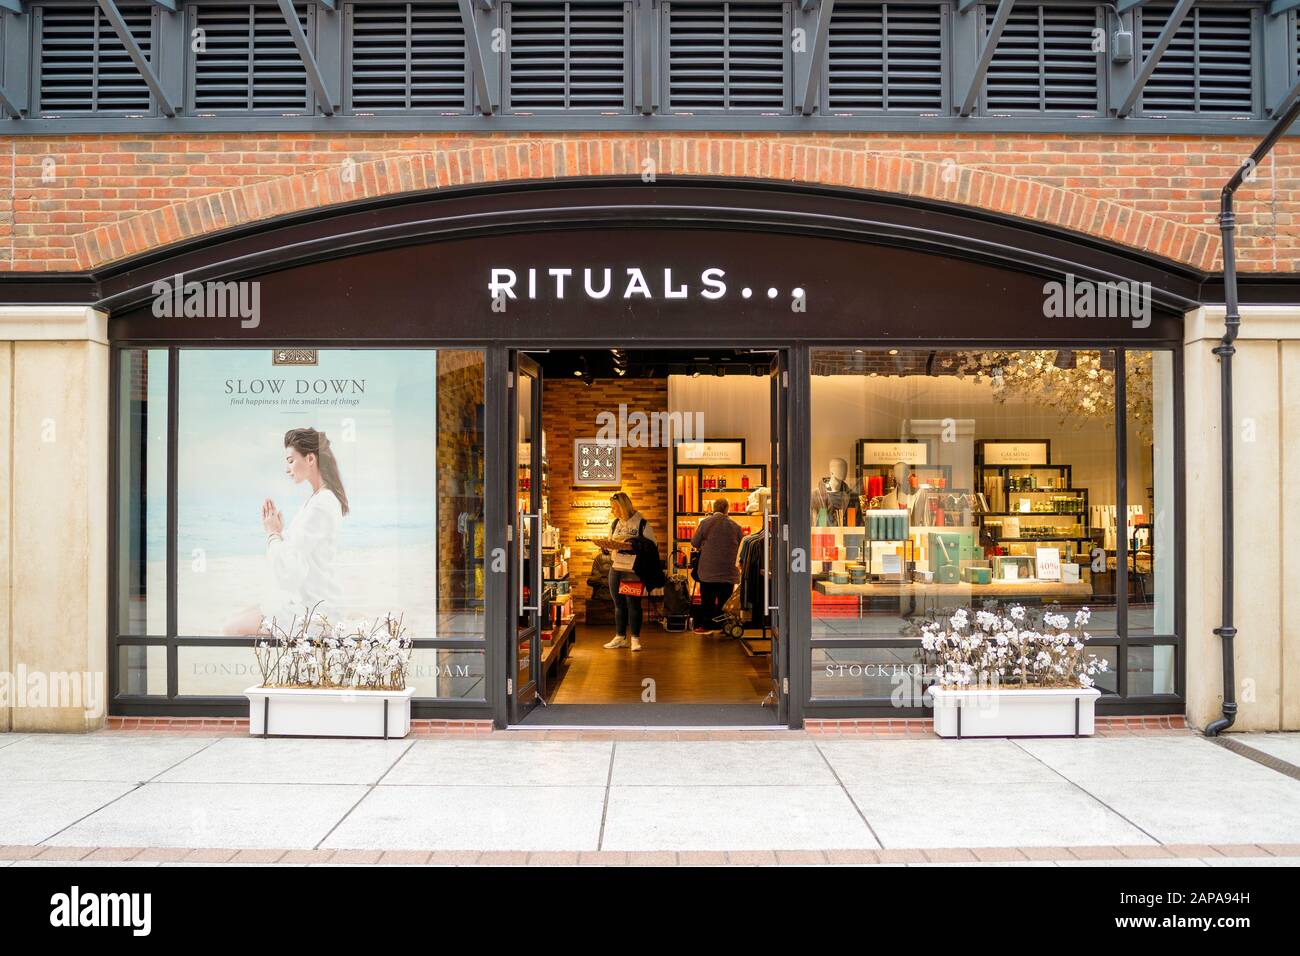 Rituals Store High Resolution Stock Photography and Images - Alamy